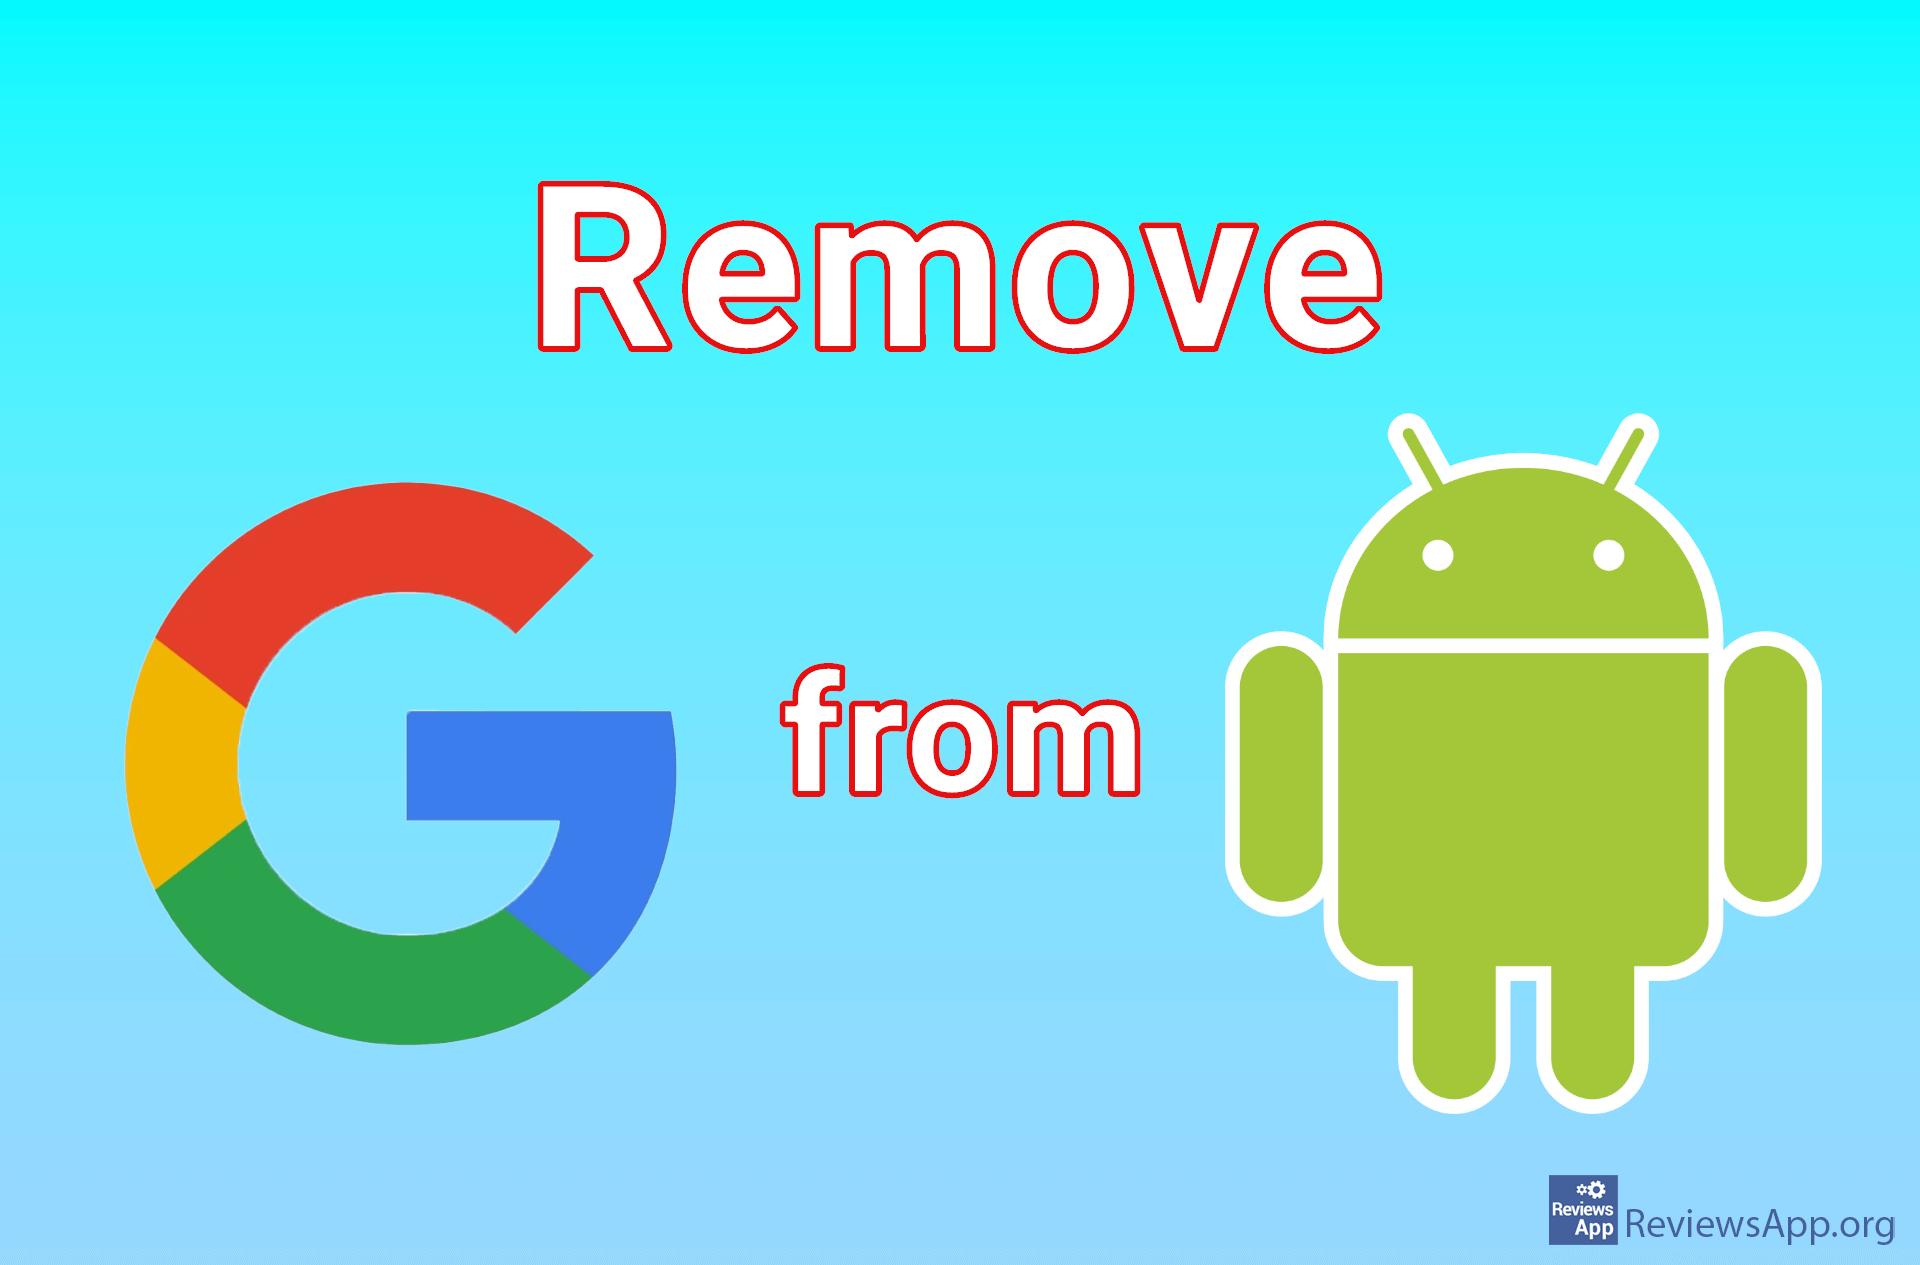 How to remove a Google account on Android